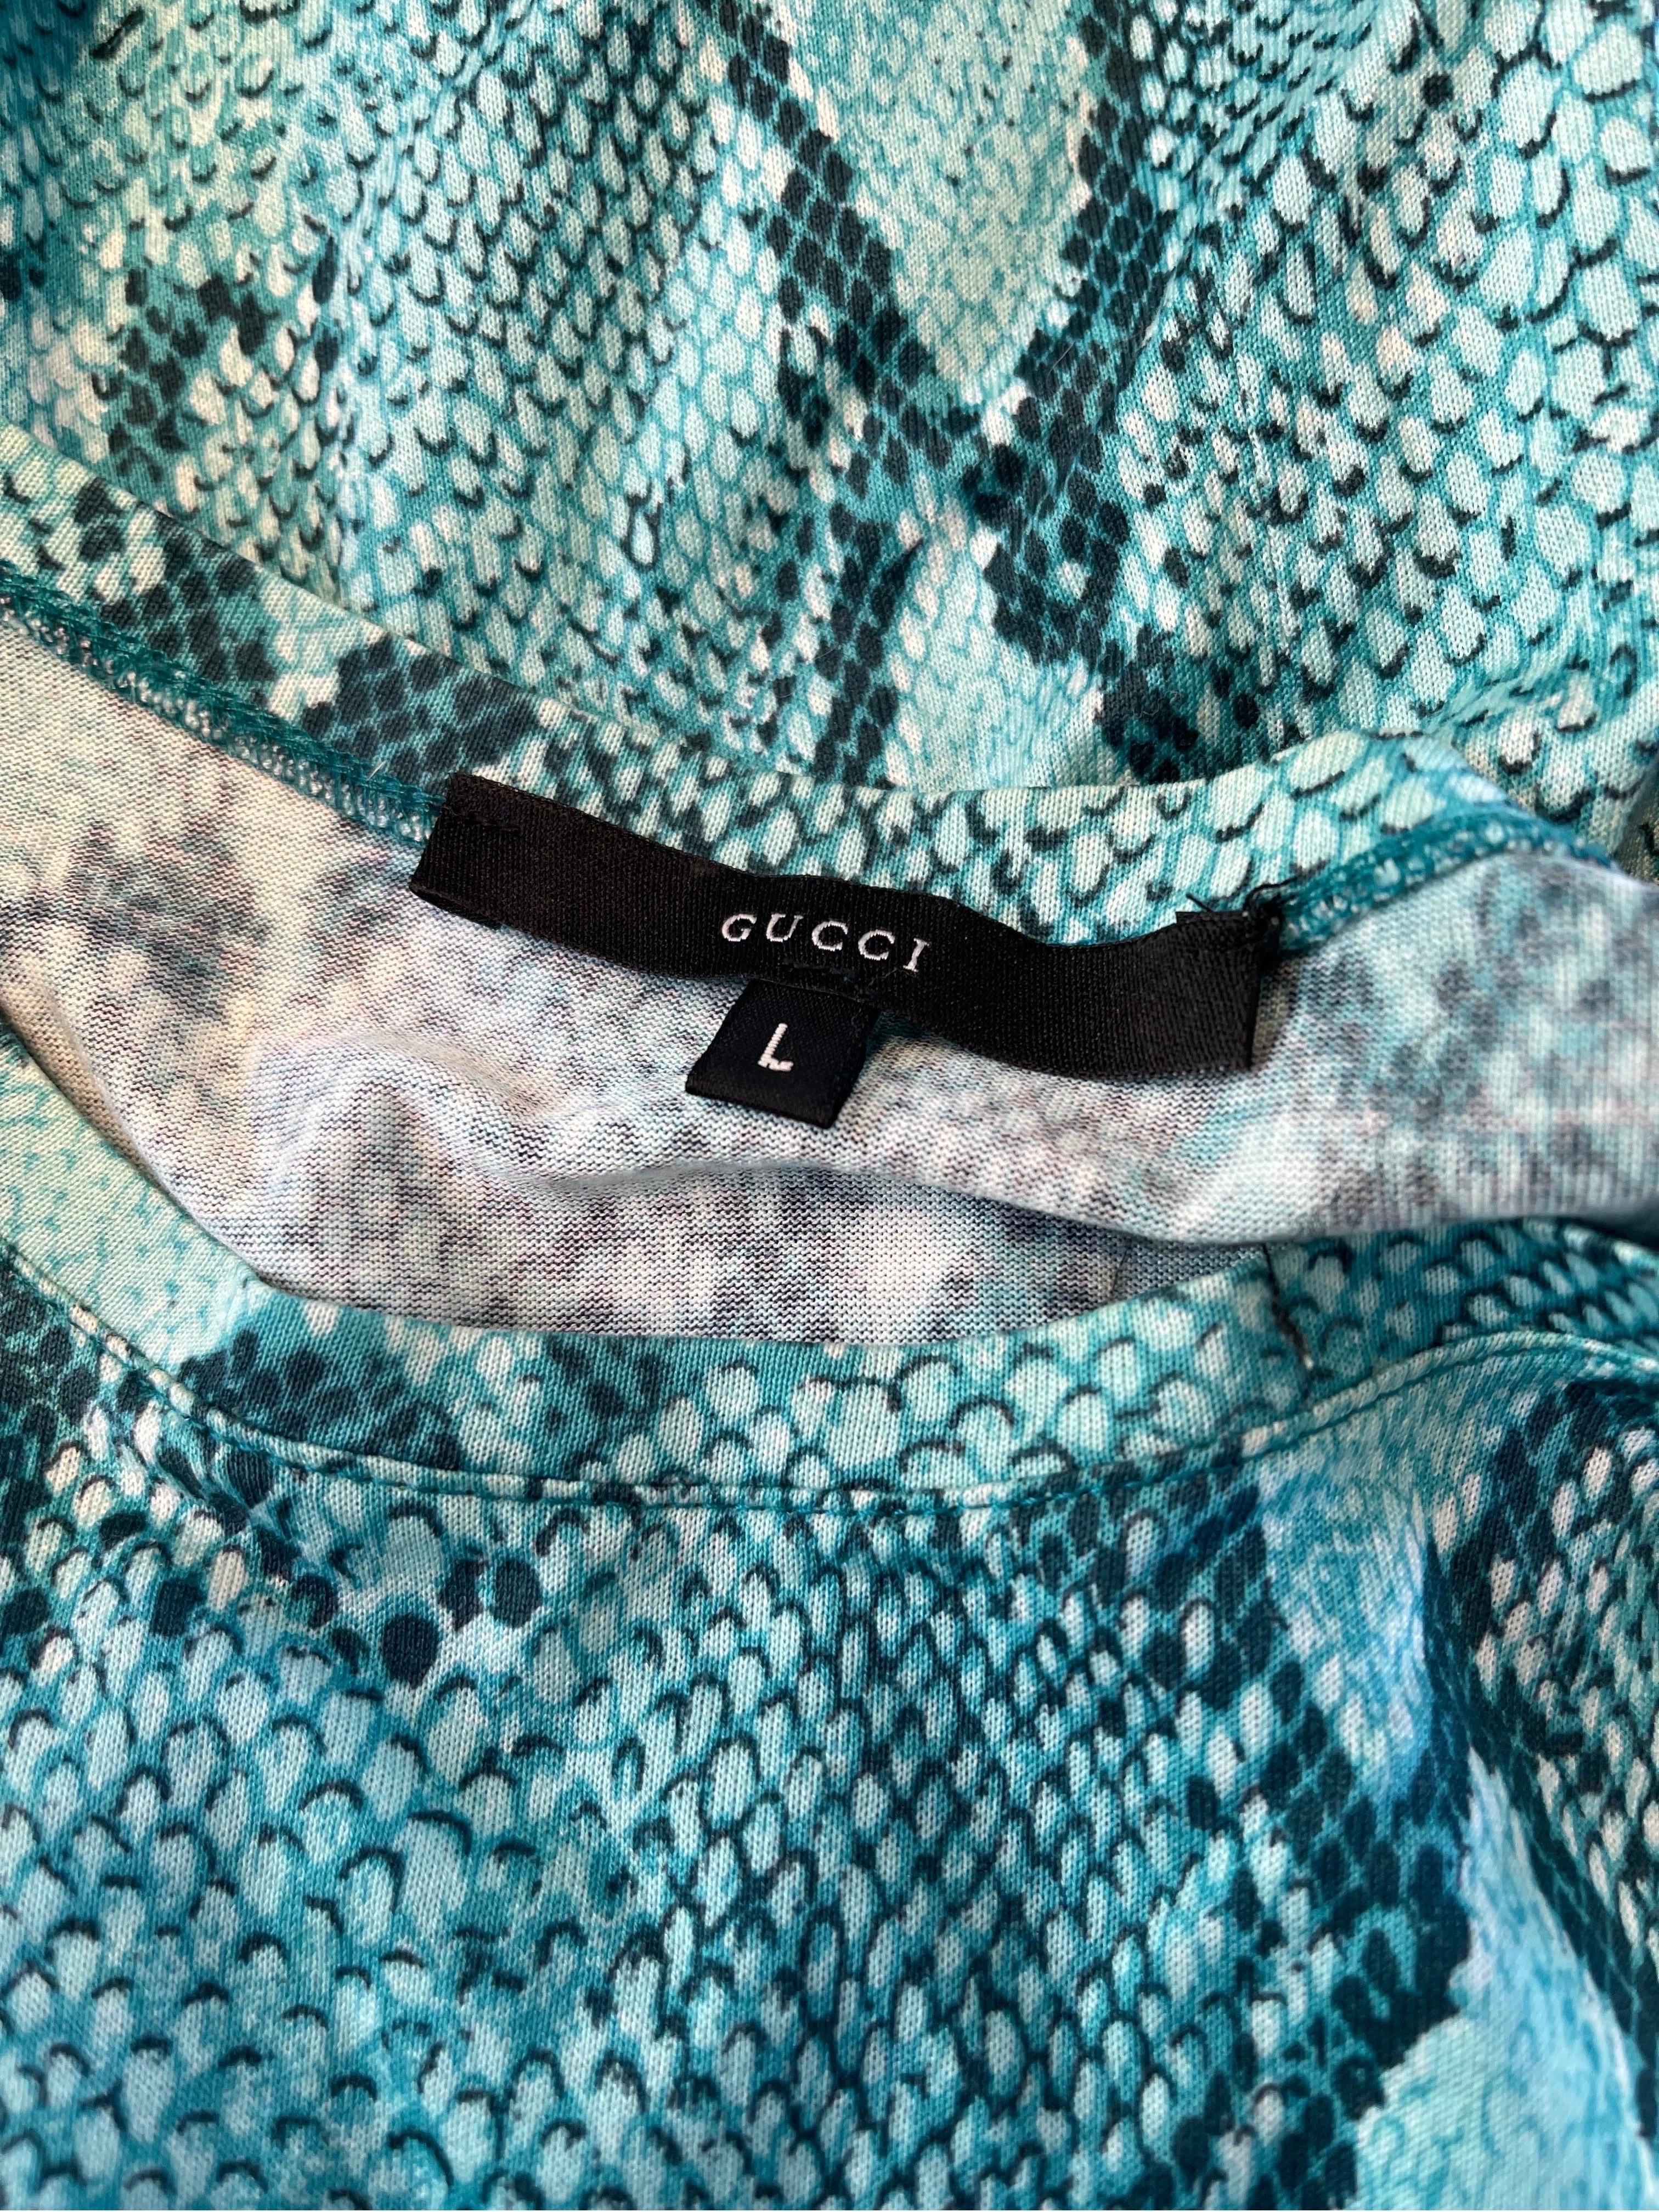 GUCCI by TOM FORD Spring / Summer 2000 turquoise blue snakeskin / python print short sleeve t-shirt ! Features all over snake print. Great layered or alone. Slightly cropped. Soft cotton stretches to fit.
In great unworn condition
Made in